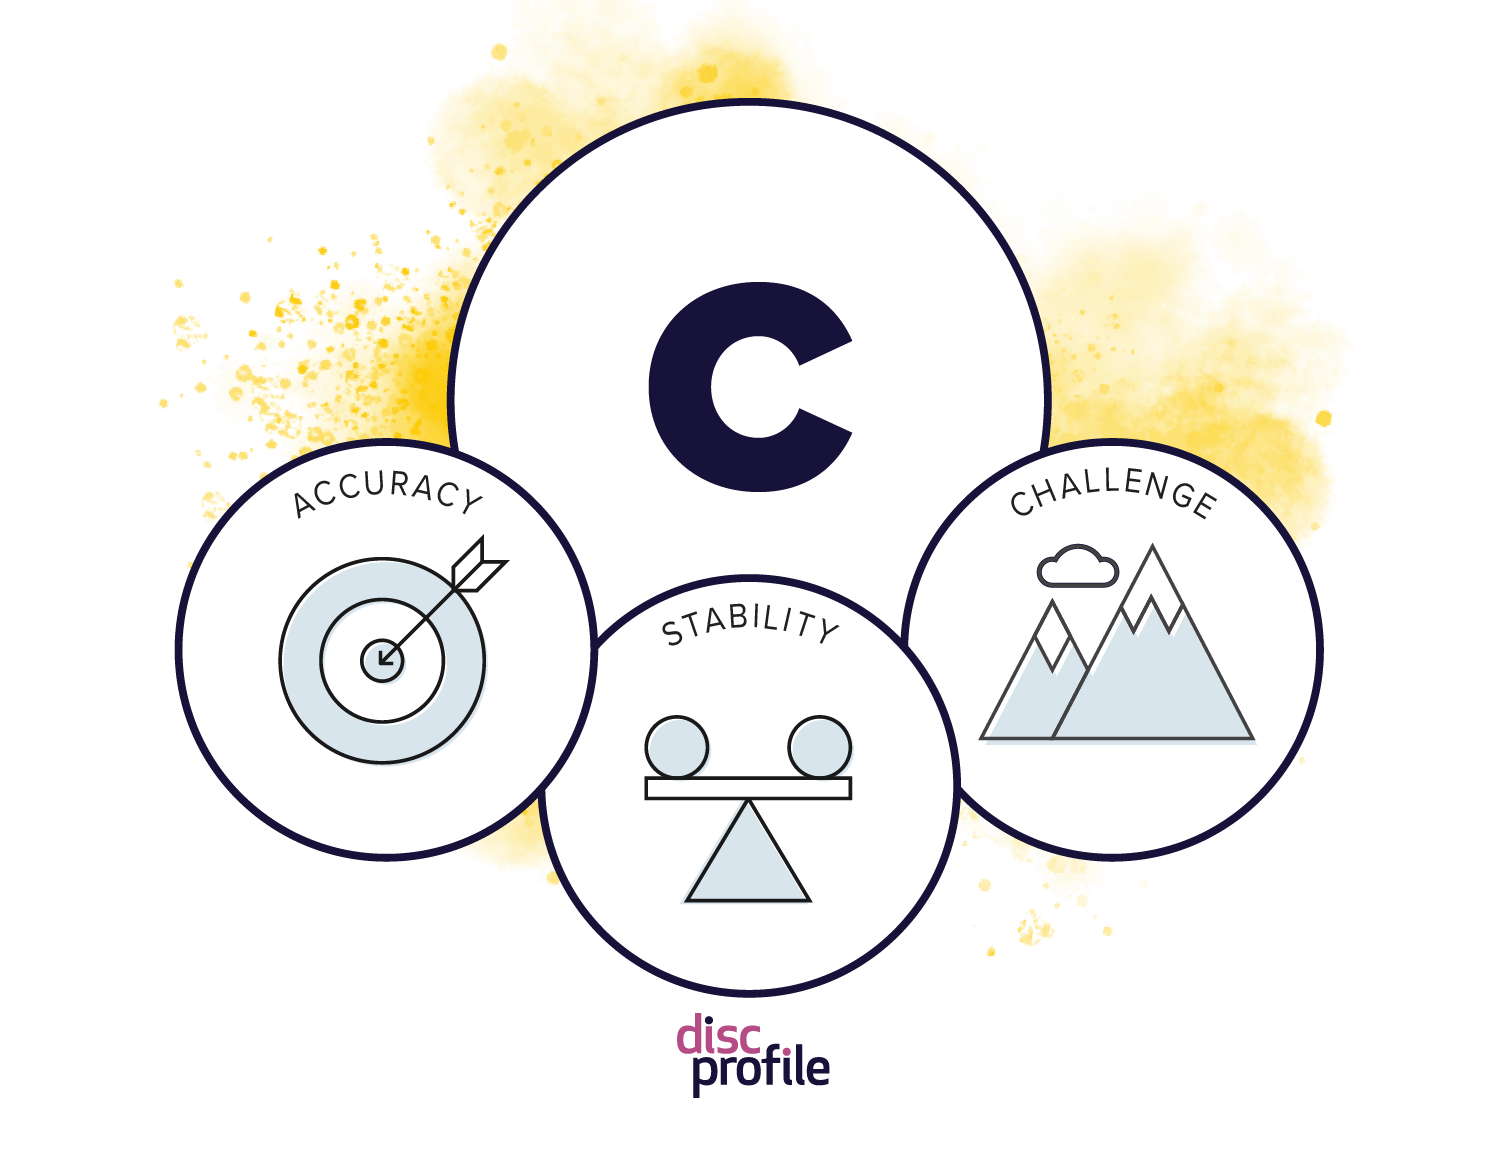 C style graphic with priorities: accuracy, stability, challenge